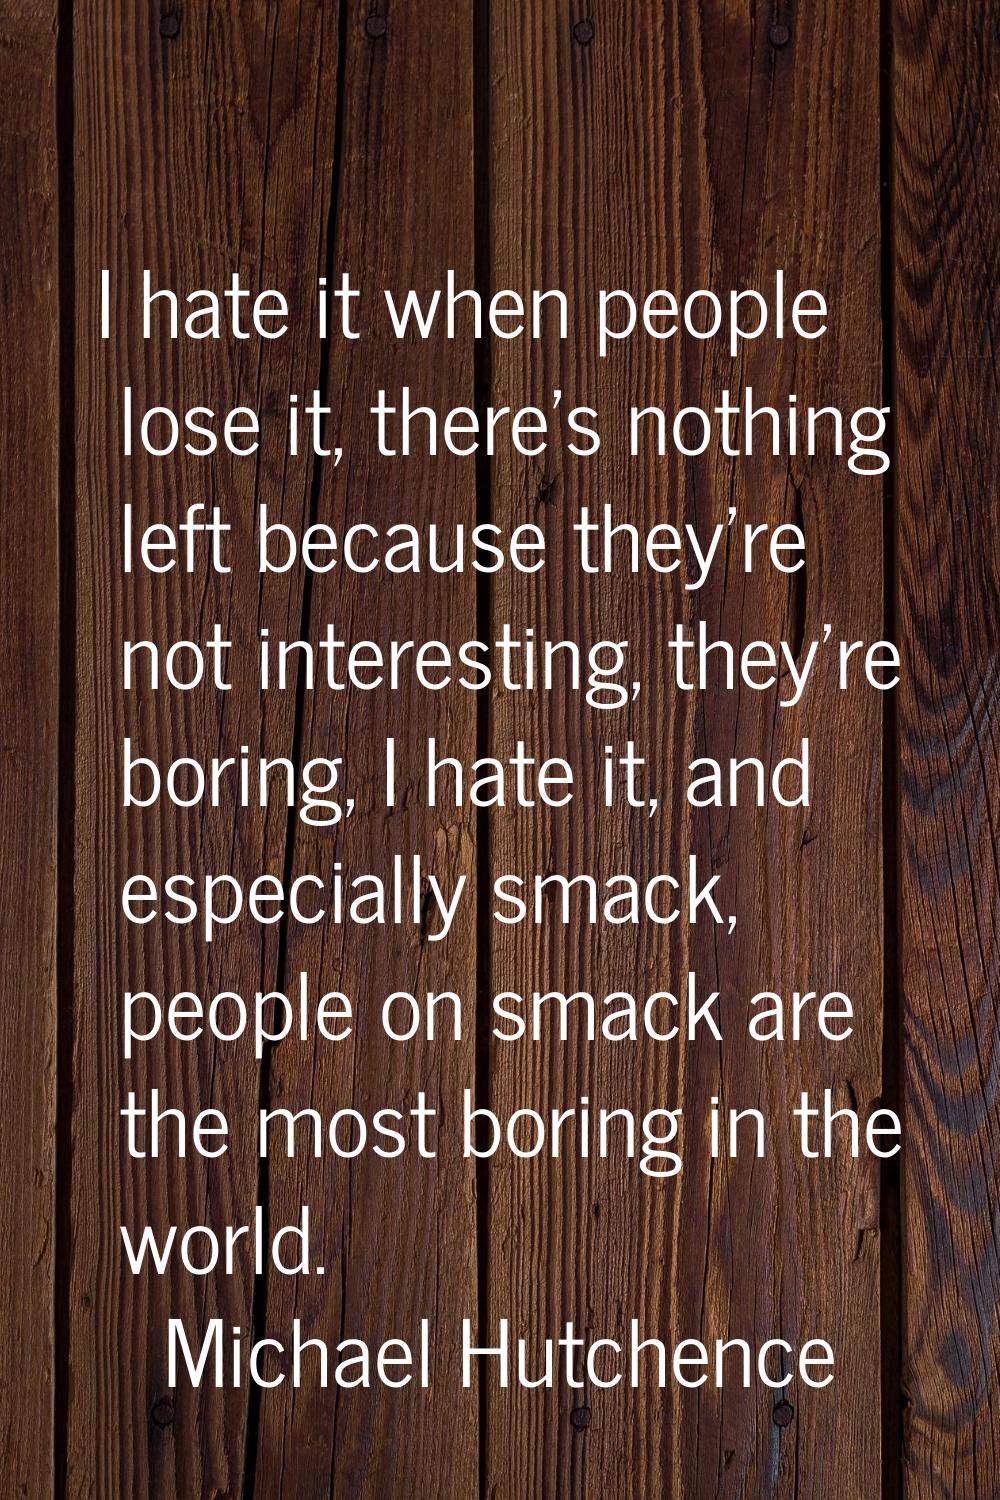 I hate it when people lose it, there's nothing left because they're not interesting, they're boring